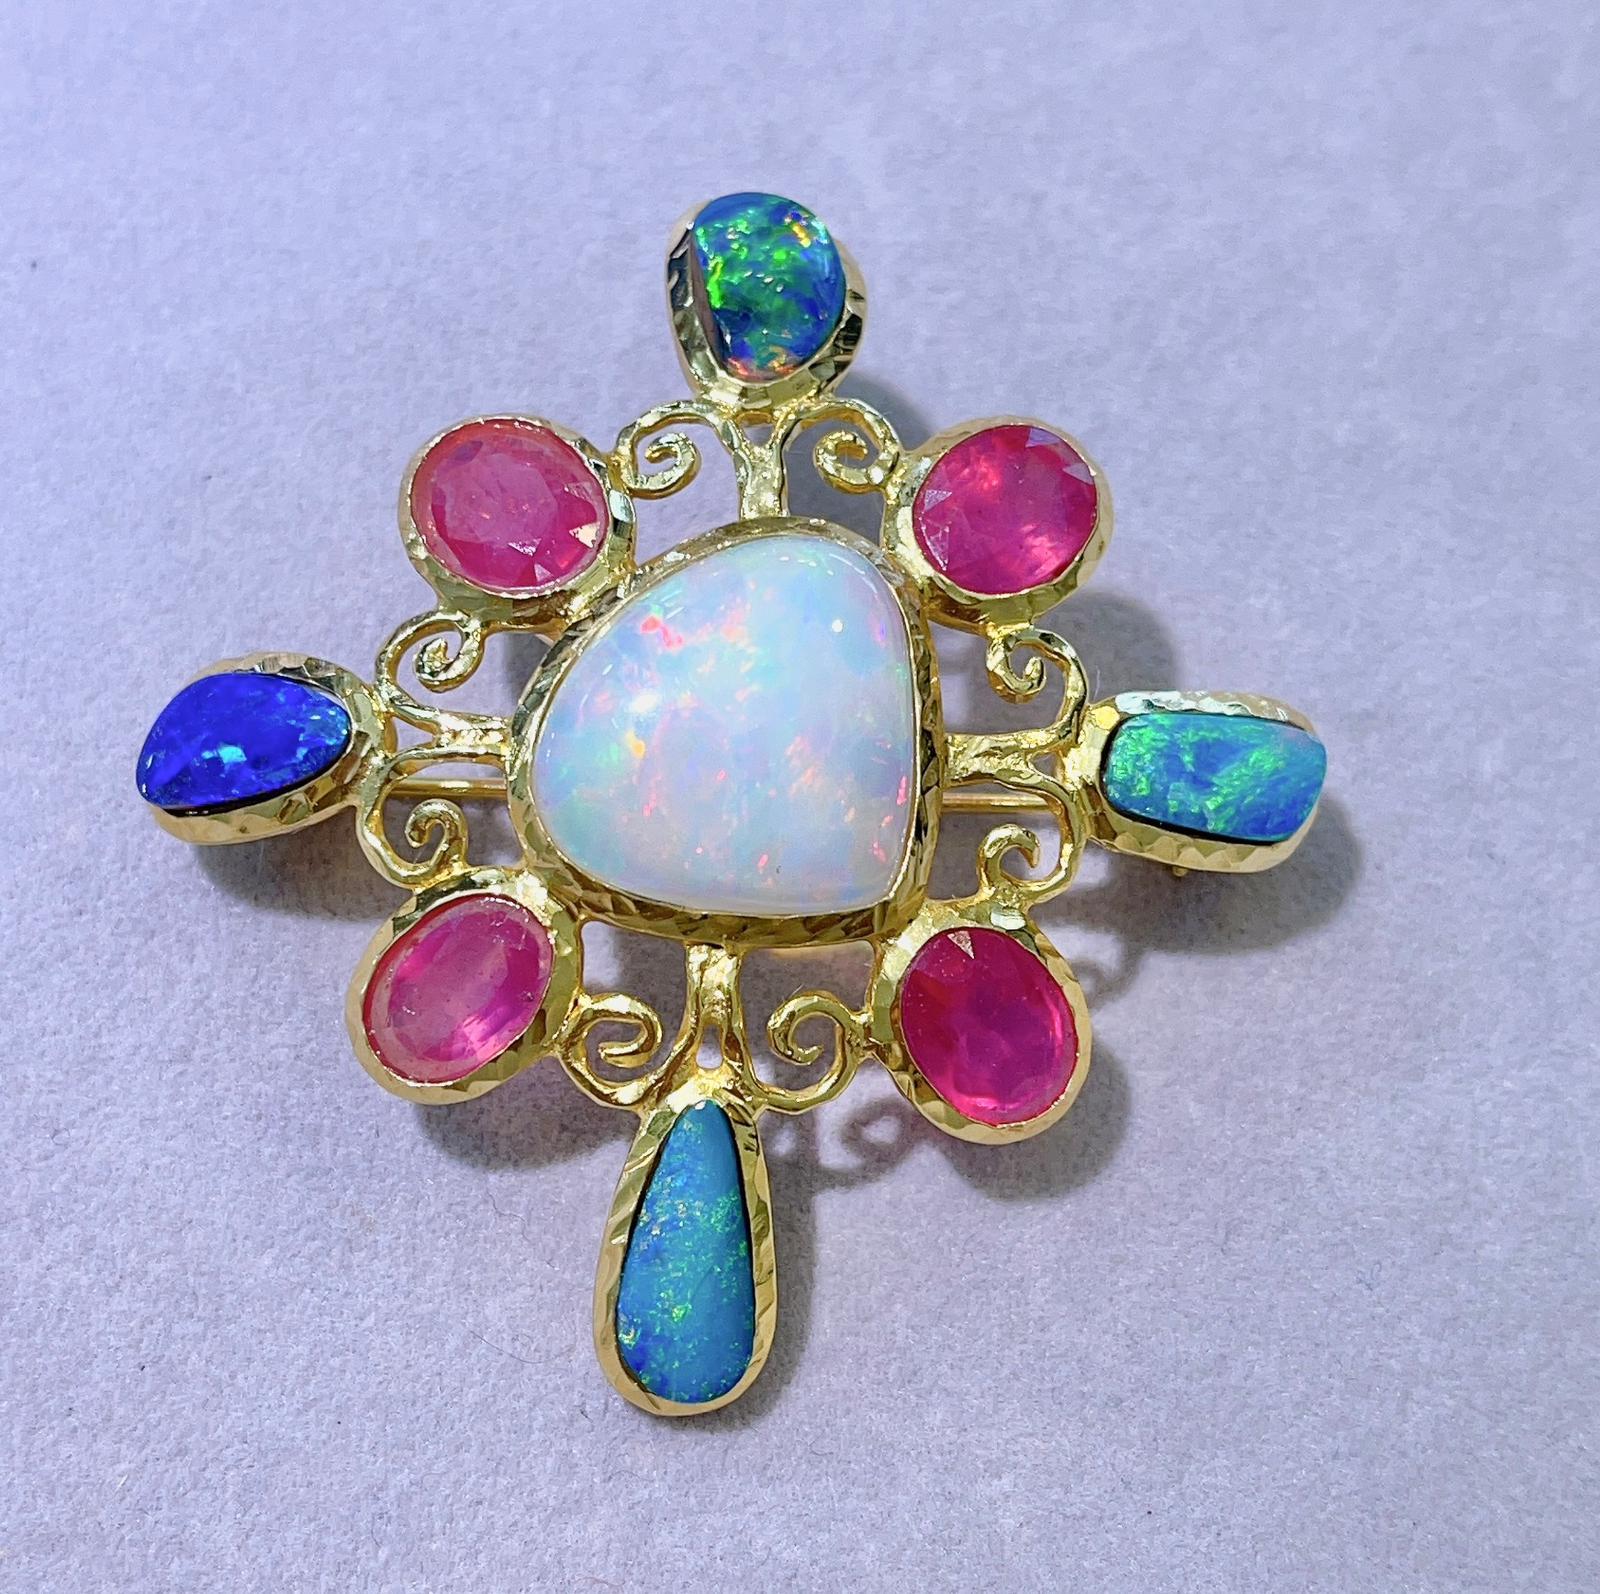 Bochic “Capri” Blue Fire Opal, White Ethiopian Opal & Ruby Brooch 
From the “Capri” collection 
Natural White Opal - 14 carats 
Natural Blue Opals - 11 carats 
Natural shapes 
Natural Ruby Cabochon - 16 carats 
Oval Brilliant shape 
Set in 22K Gold